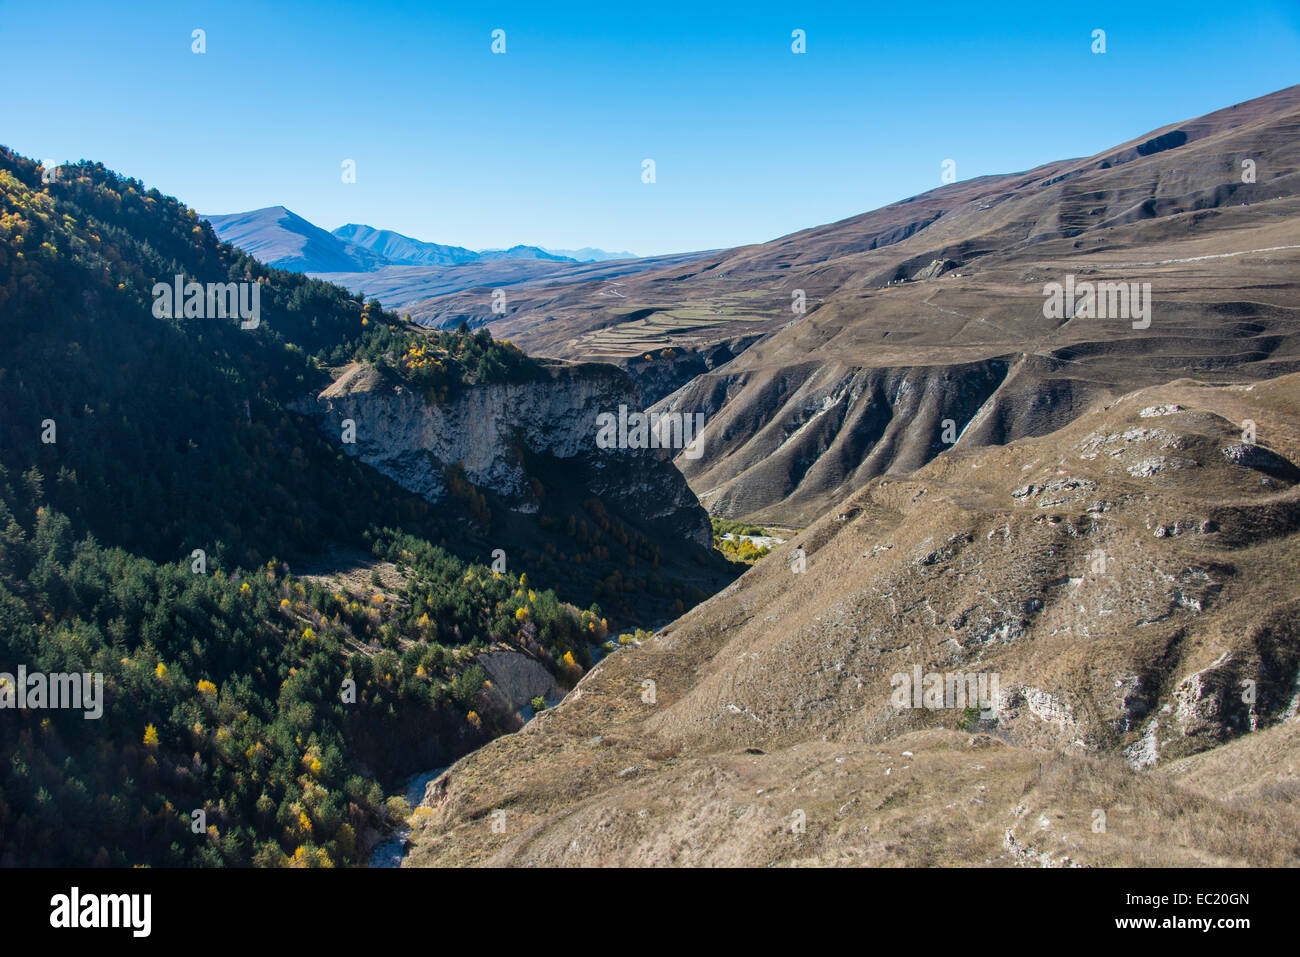 Overlook over the Chechen mountains, Chechnya, Caucasus, Russia Stock Photo